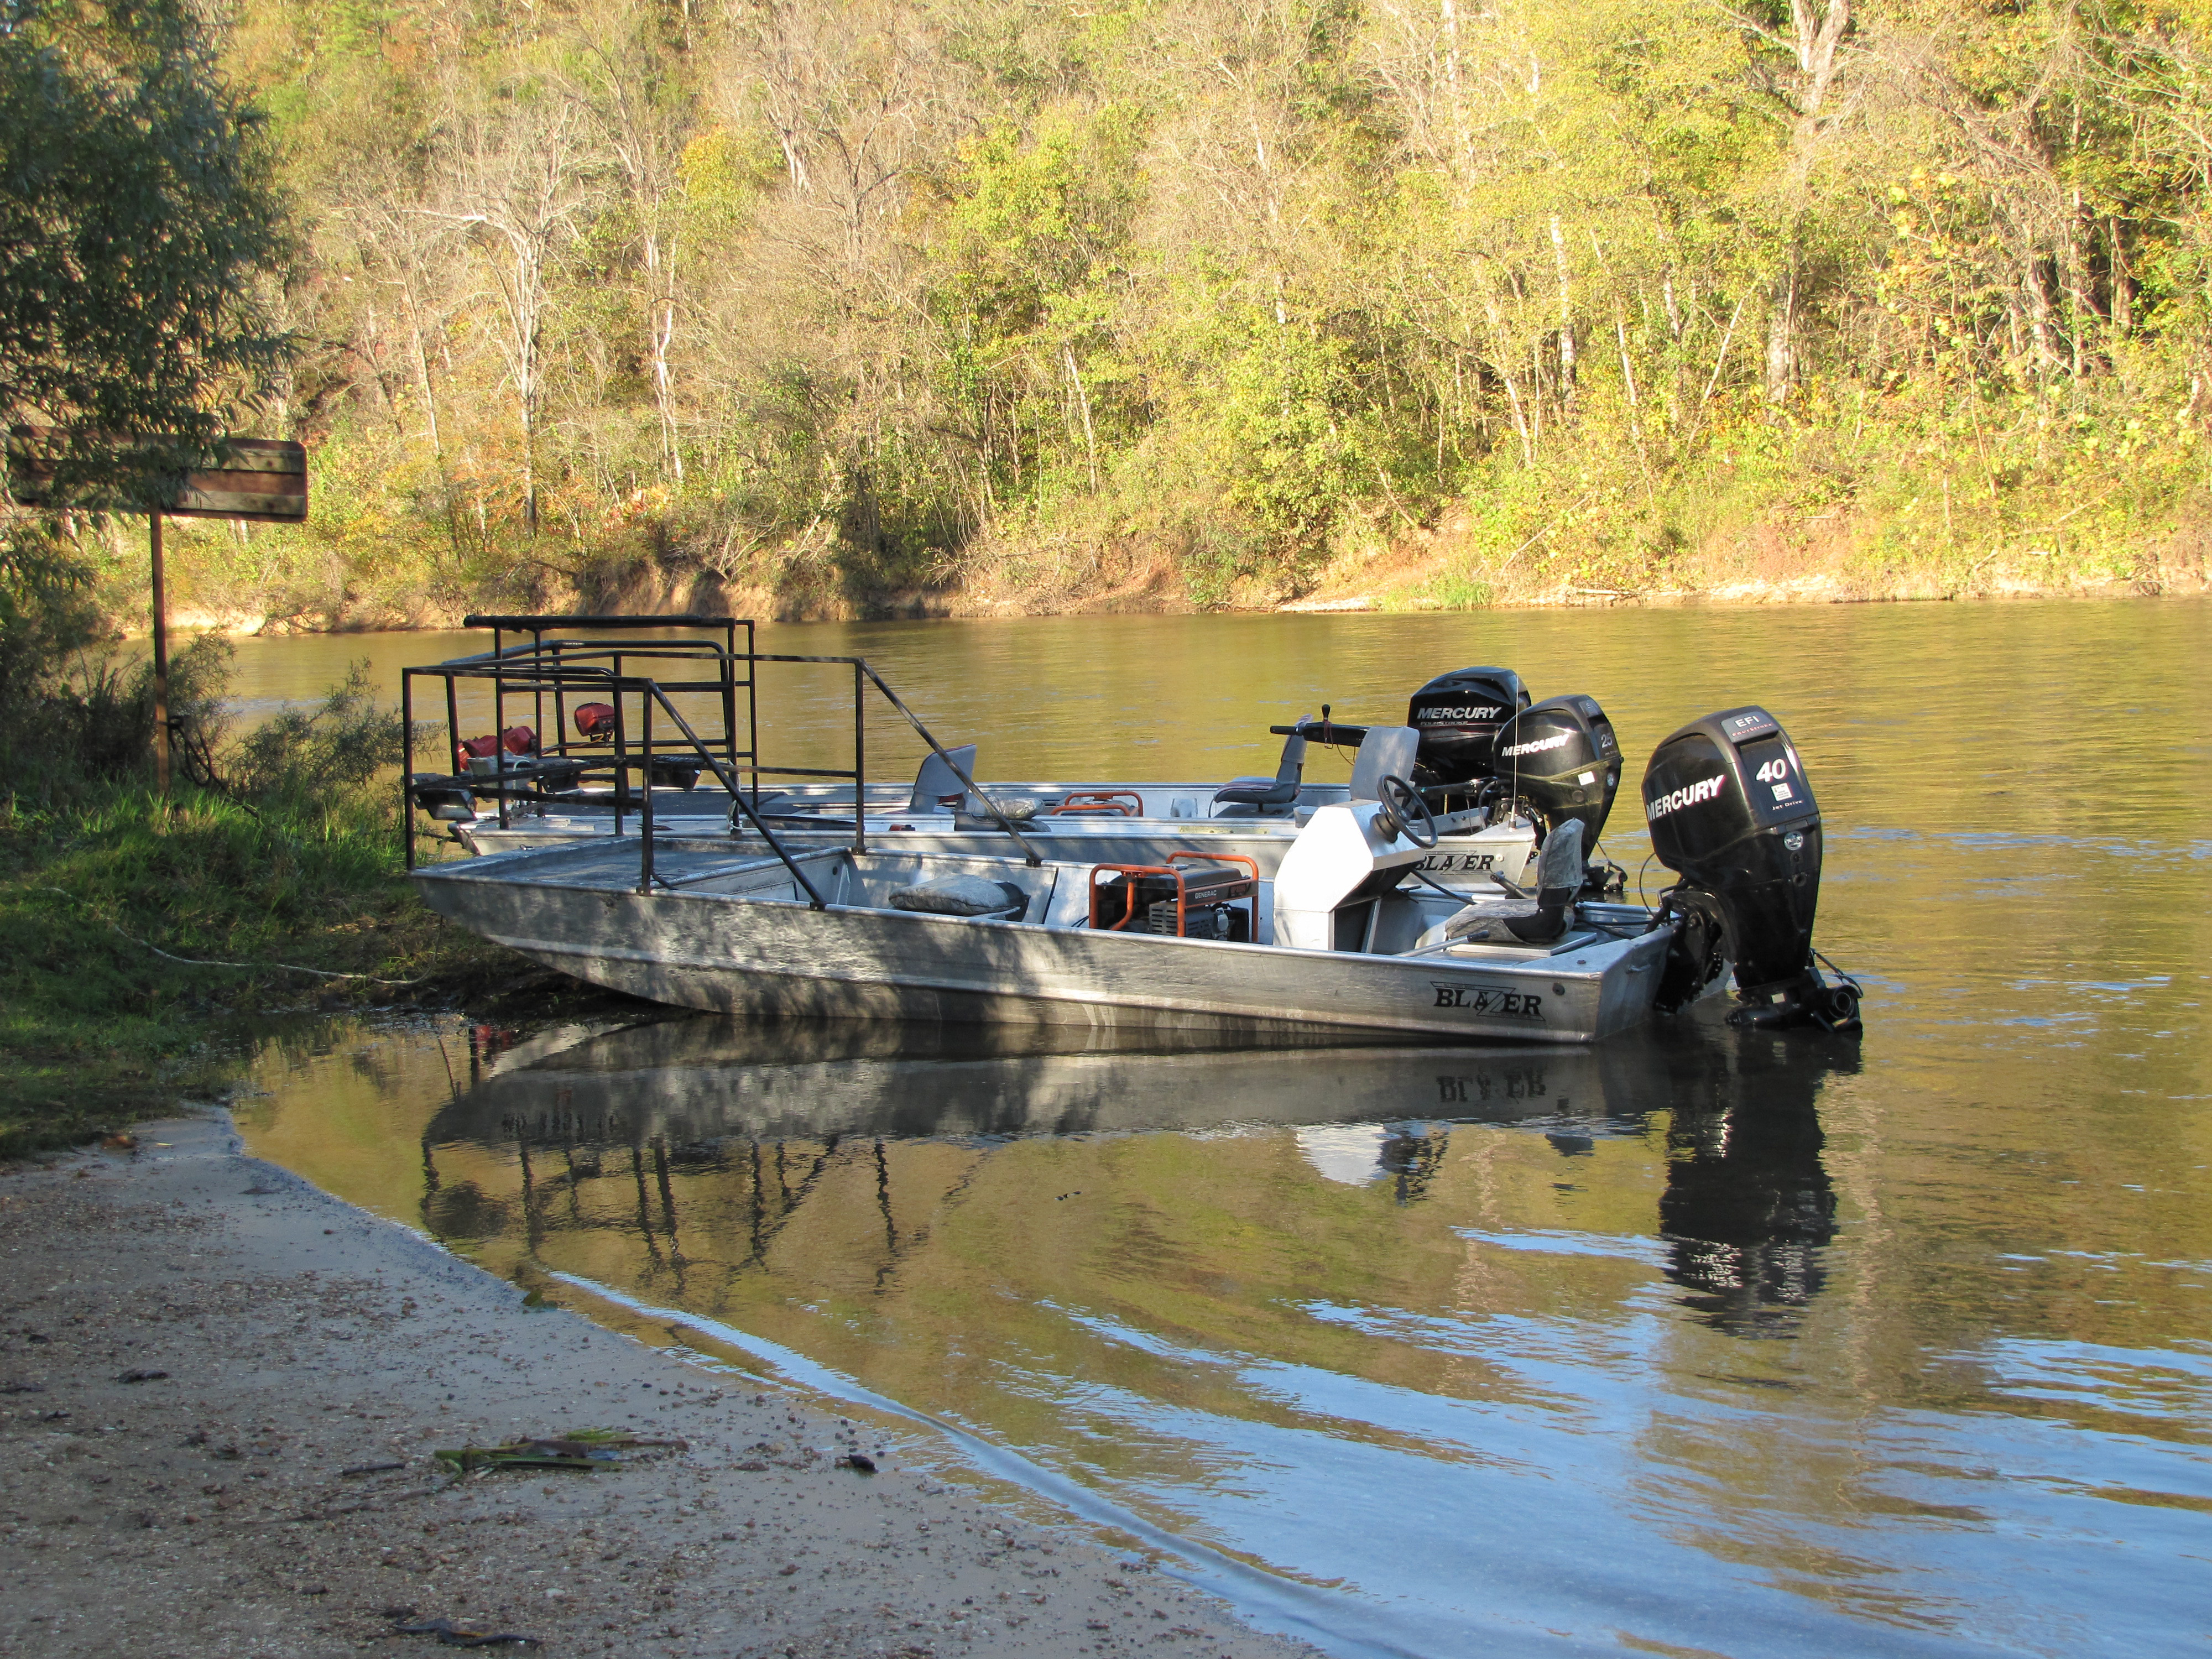 3 aluminum flat bottom jet boats are on the edge of the river during the fall. a generator is in the boat with gigging rails on the front.